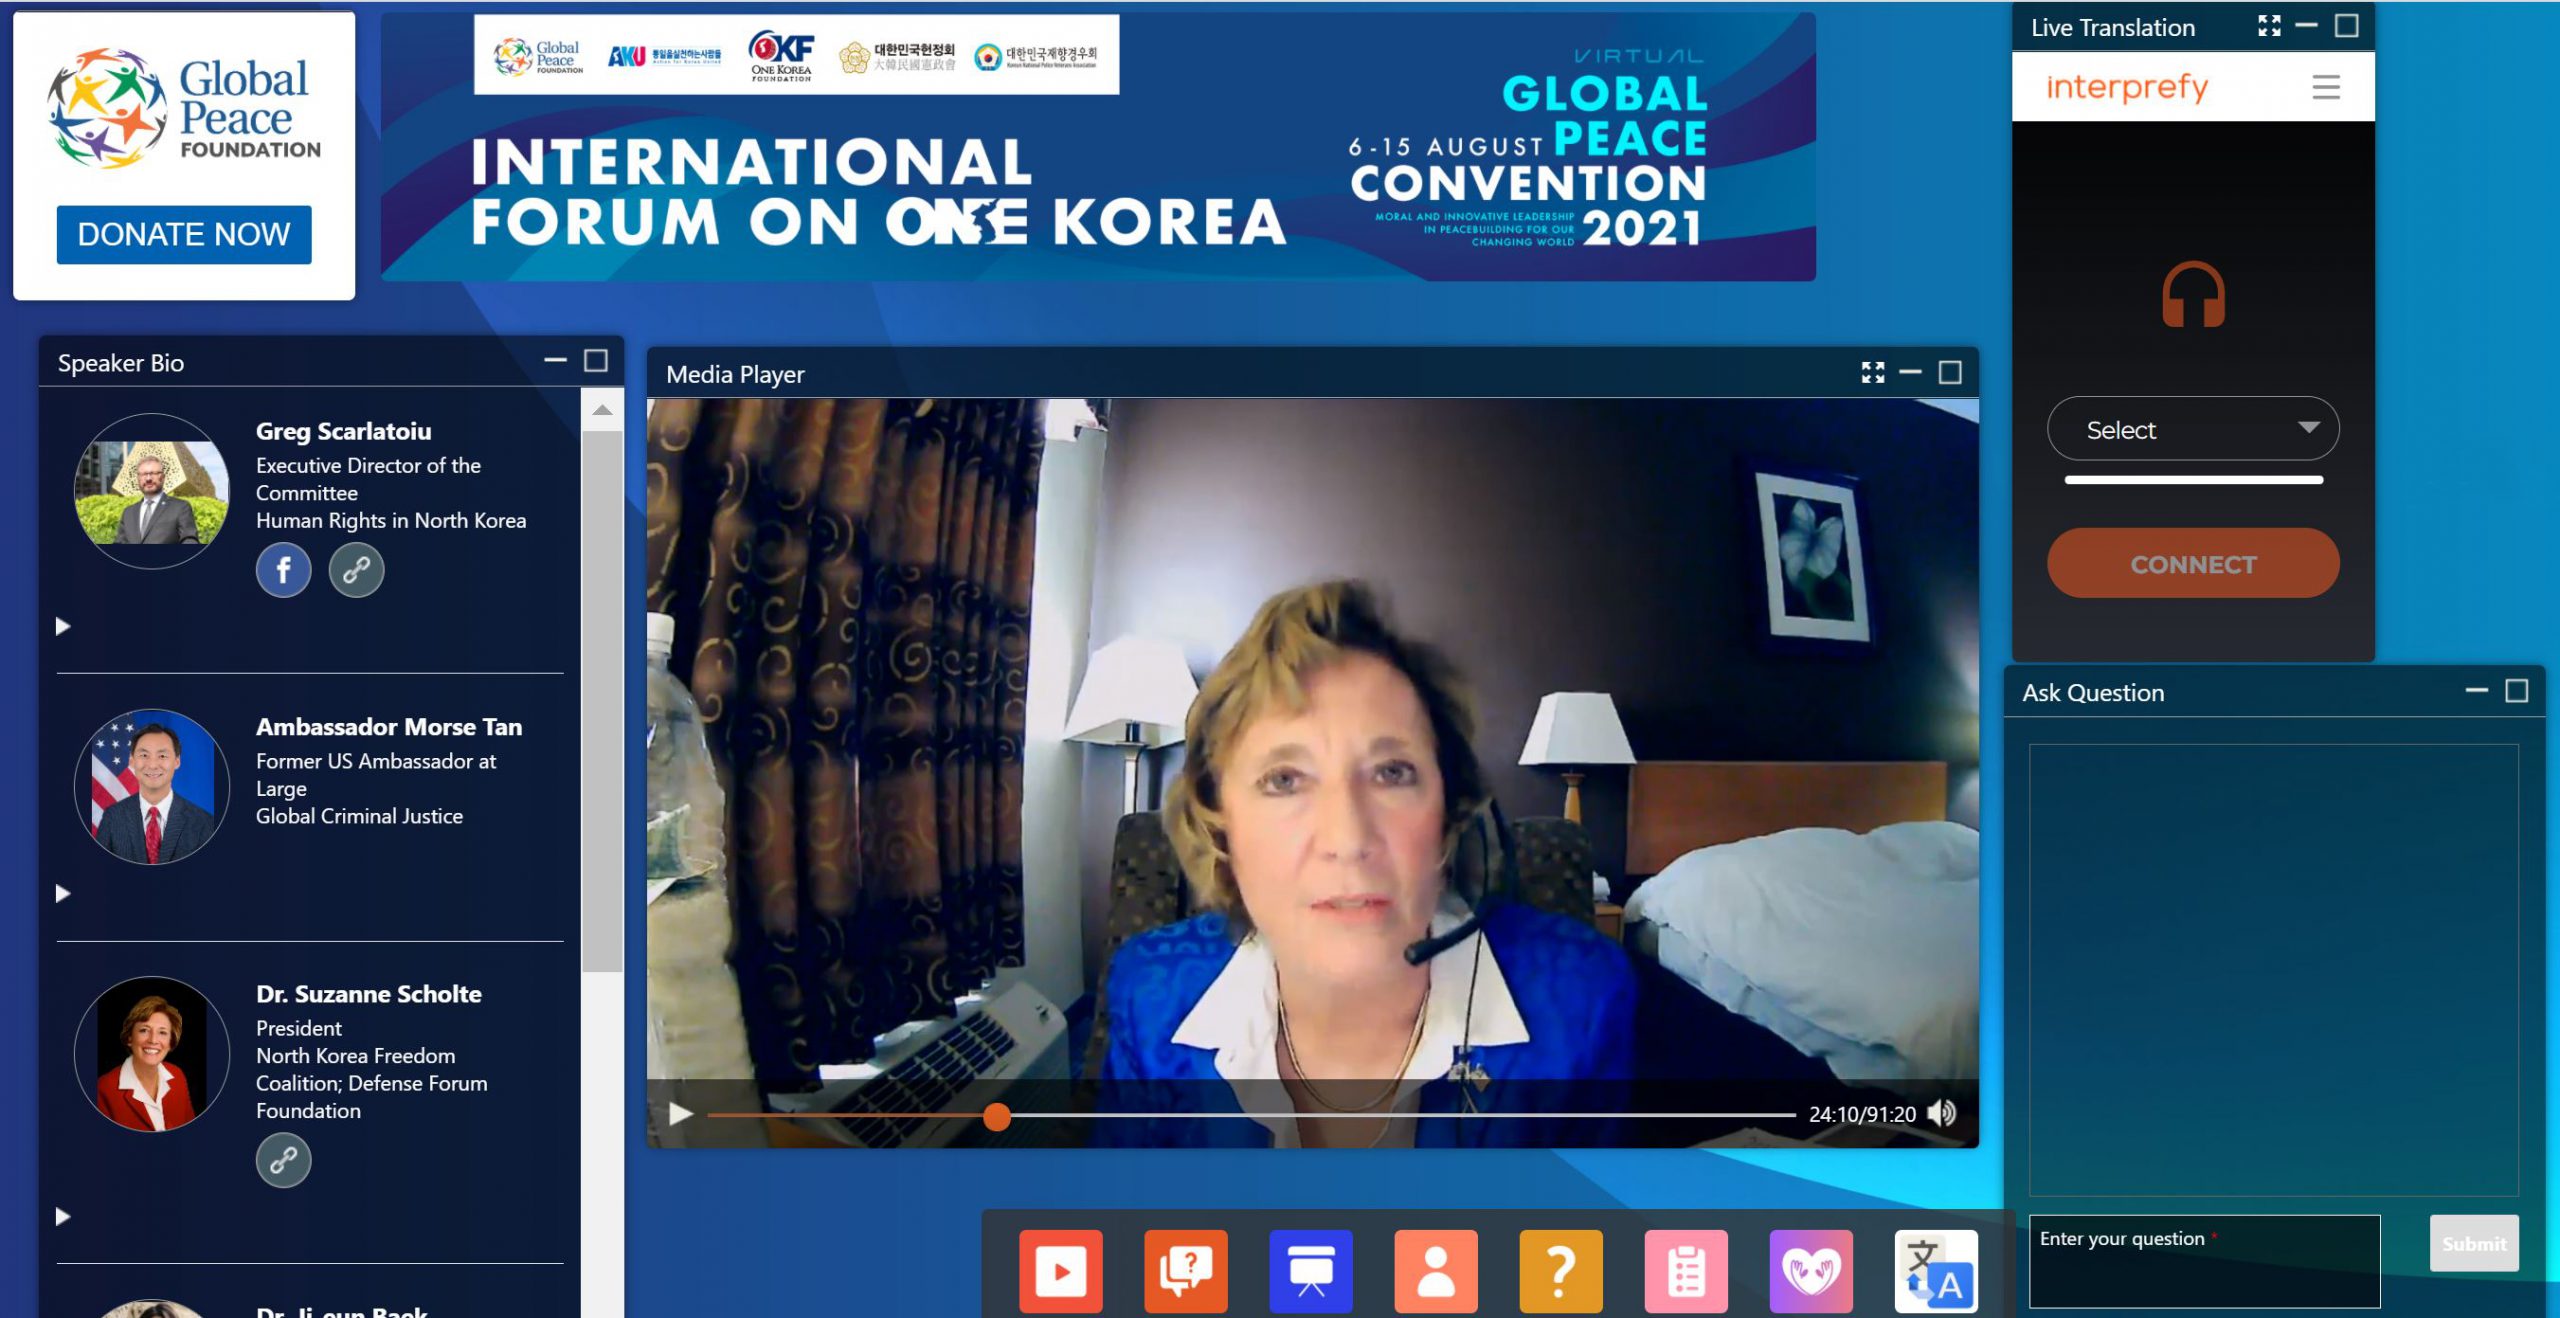 Suzanne Scholte, President of the North Korea Freedom Coalition